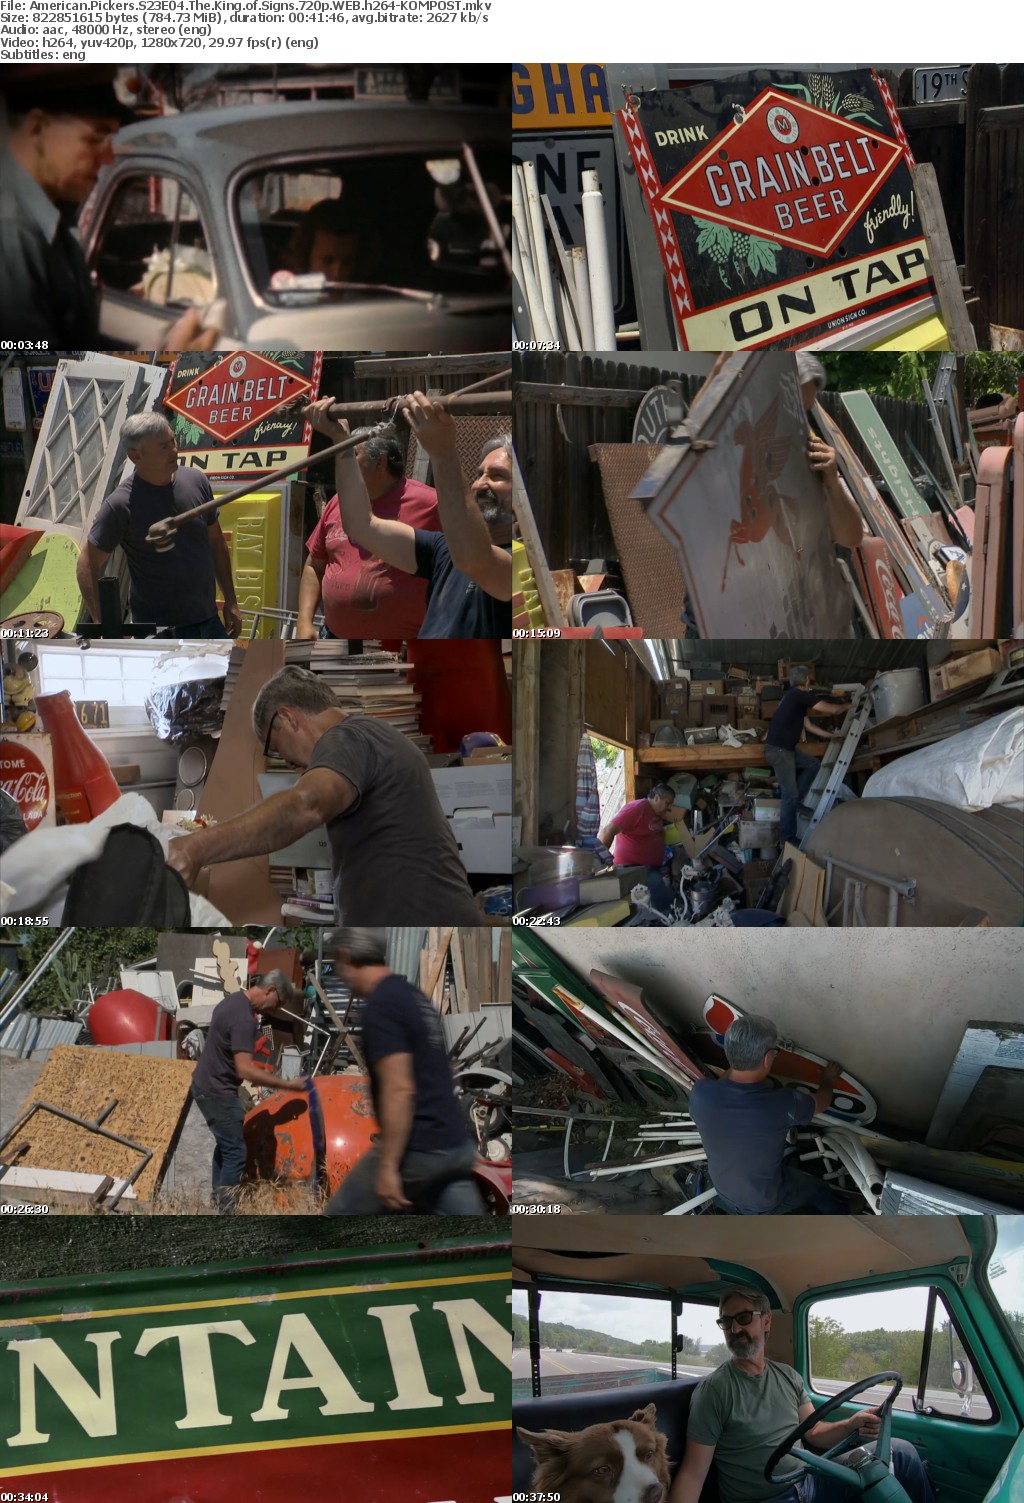 American Pickers S23E04 The King of Signs 720p WEB h264-KOMPOST